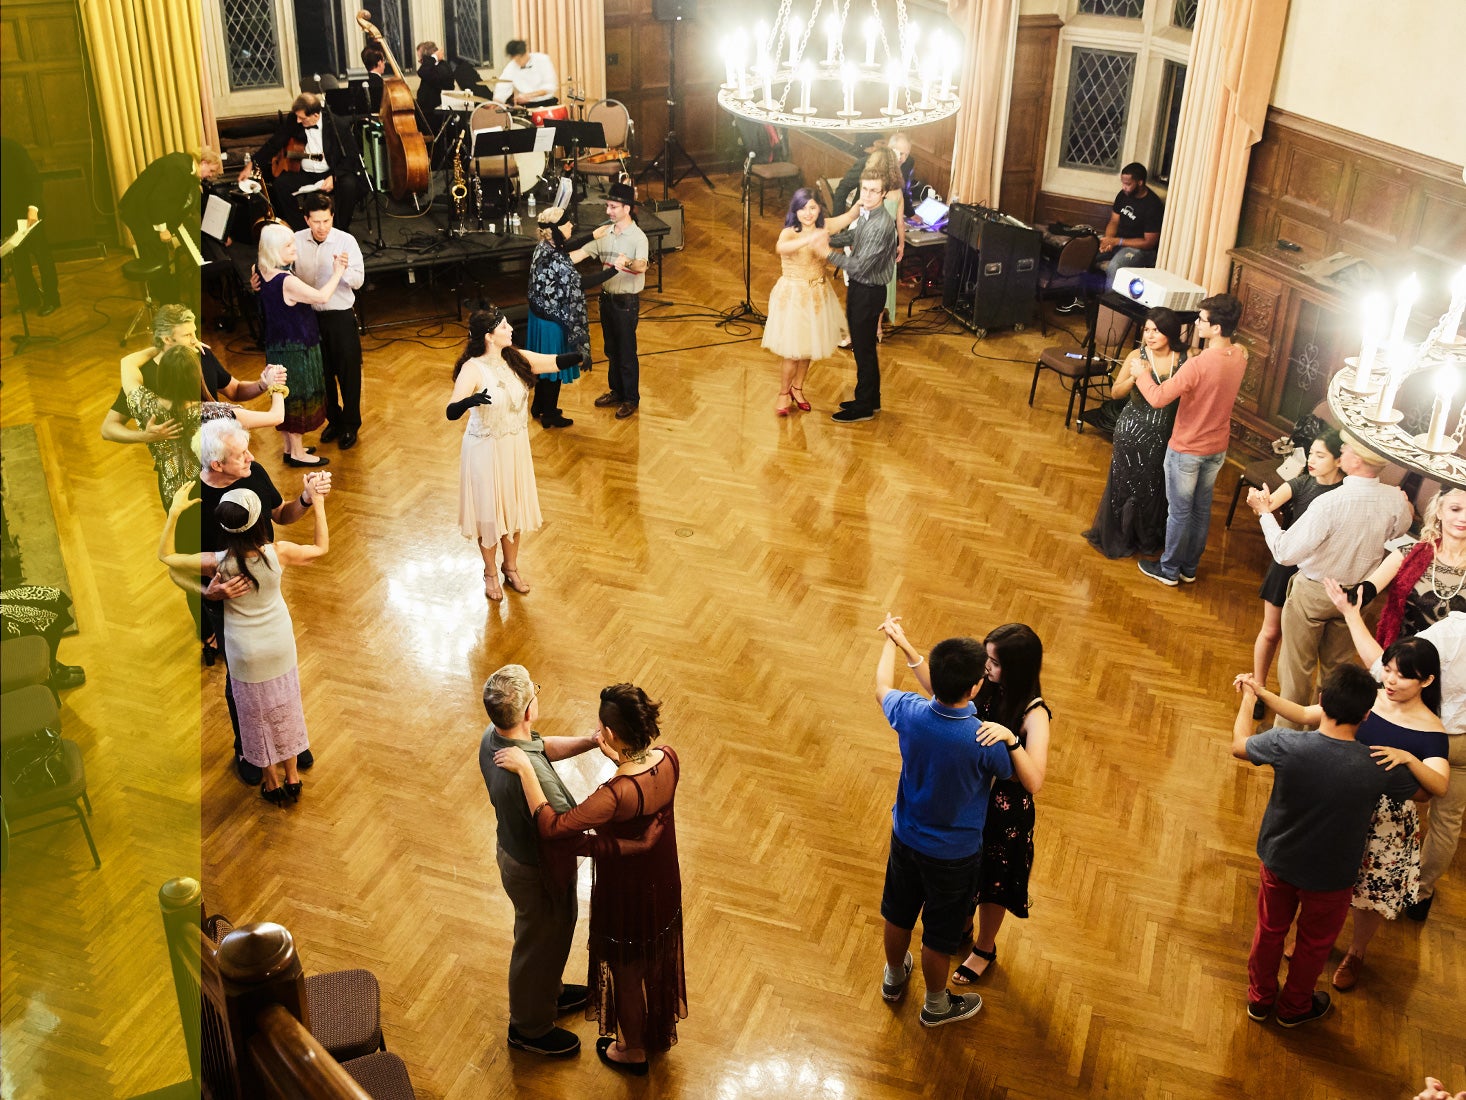 The Historical Ballroom Dance Club performs in a hall.